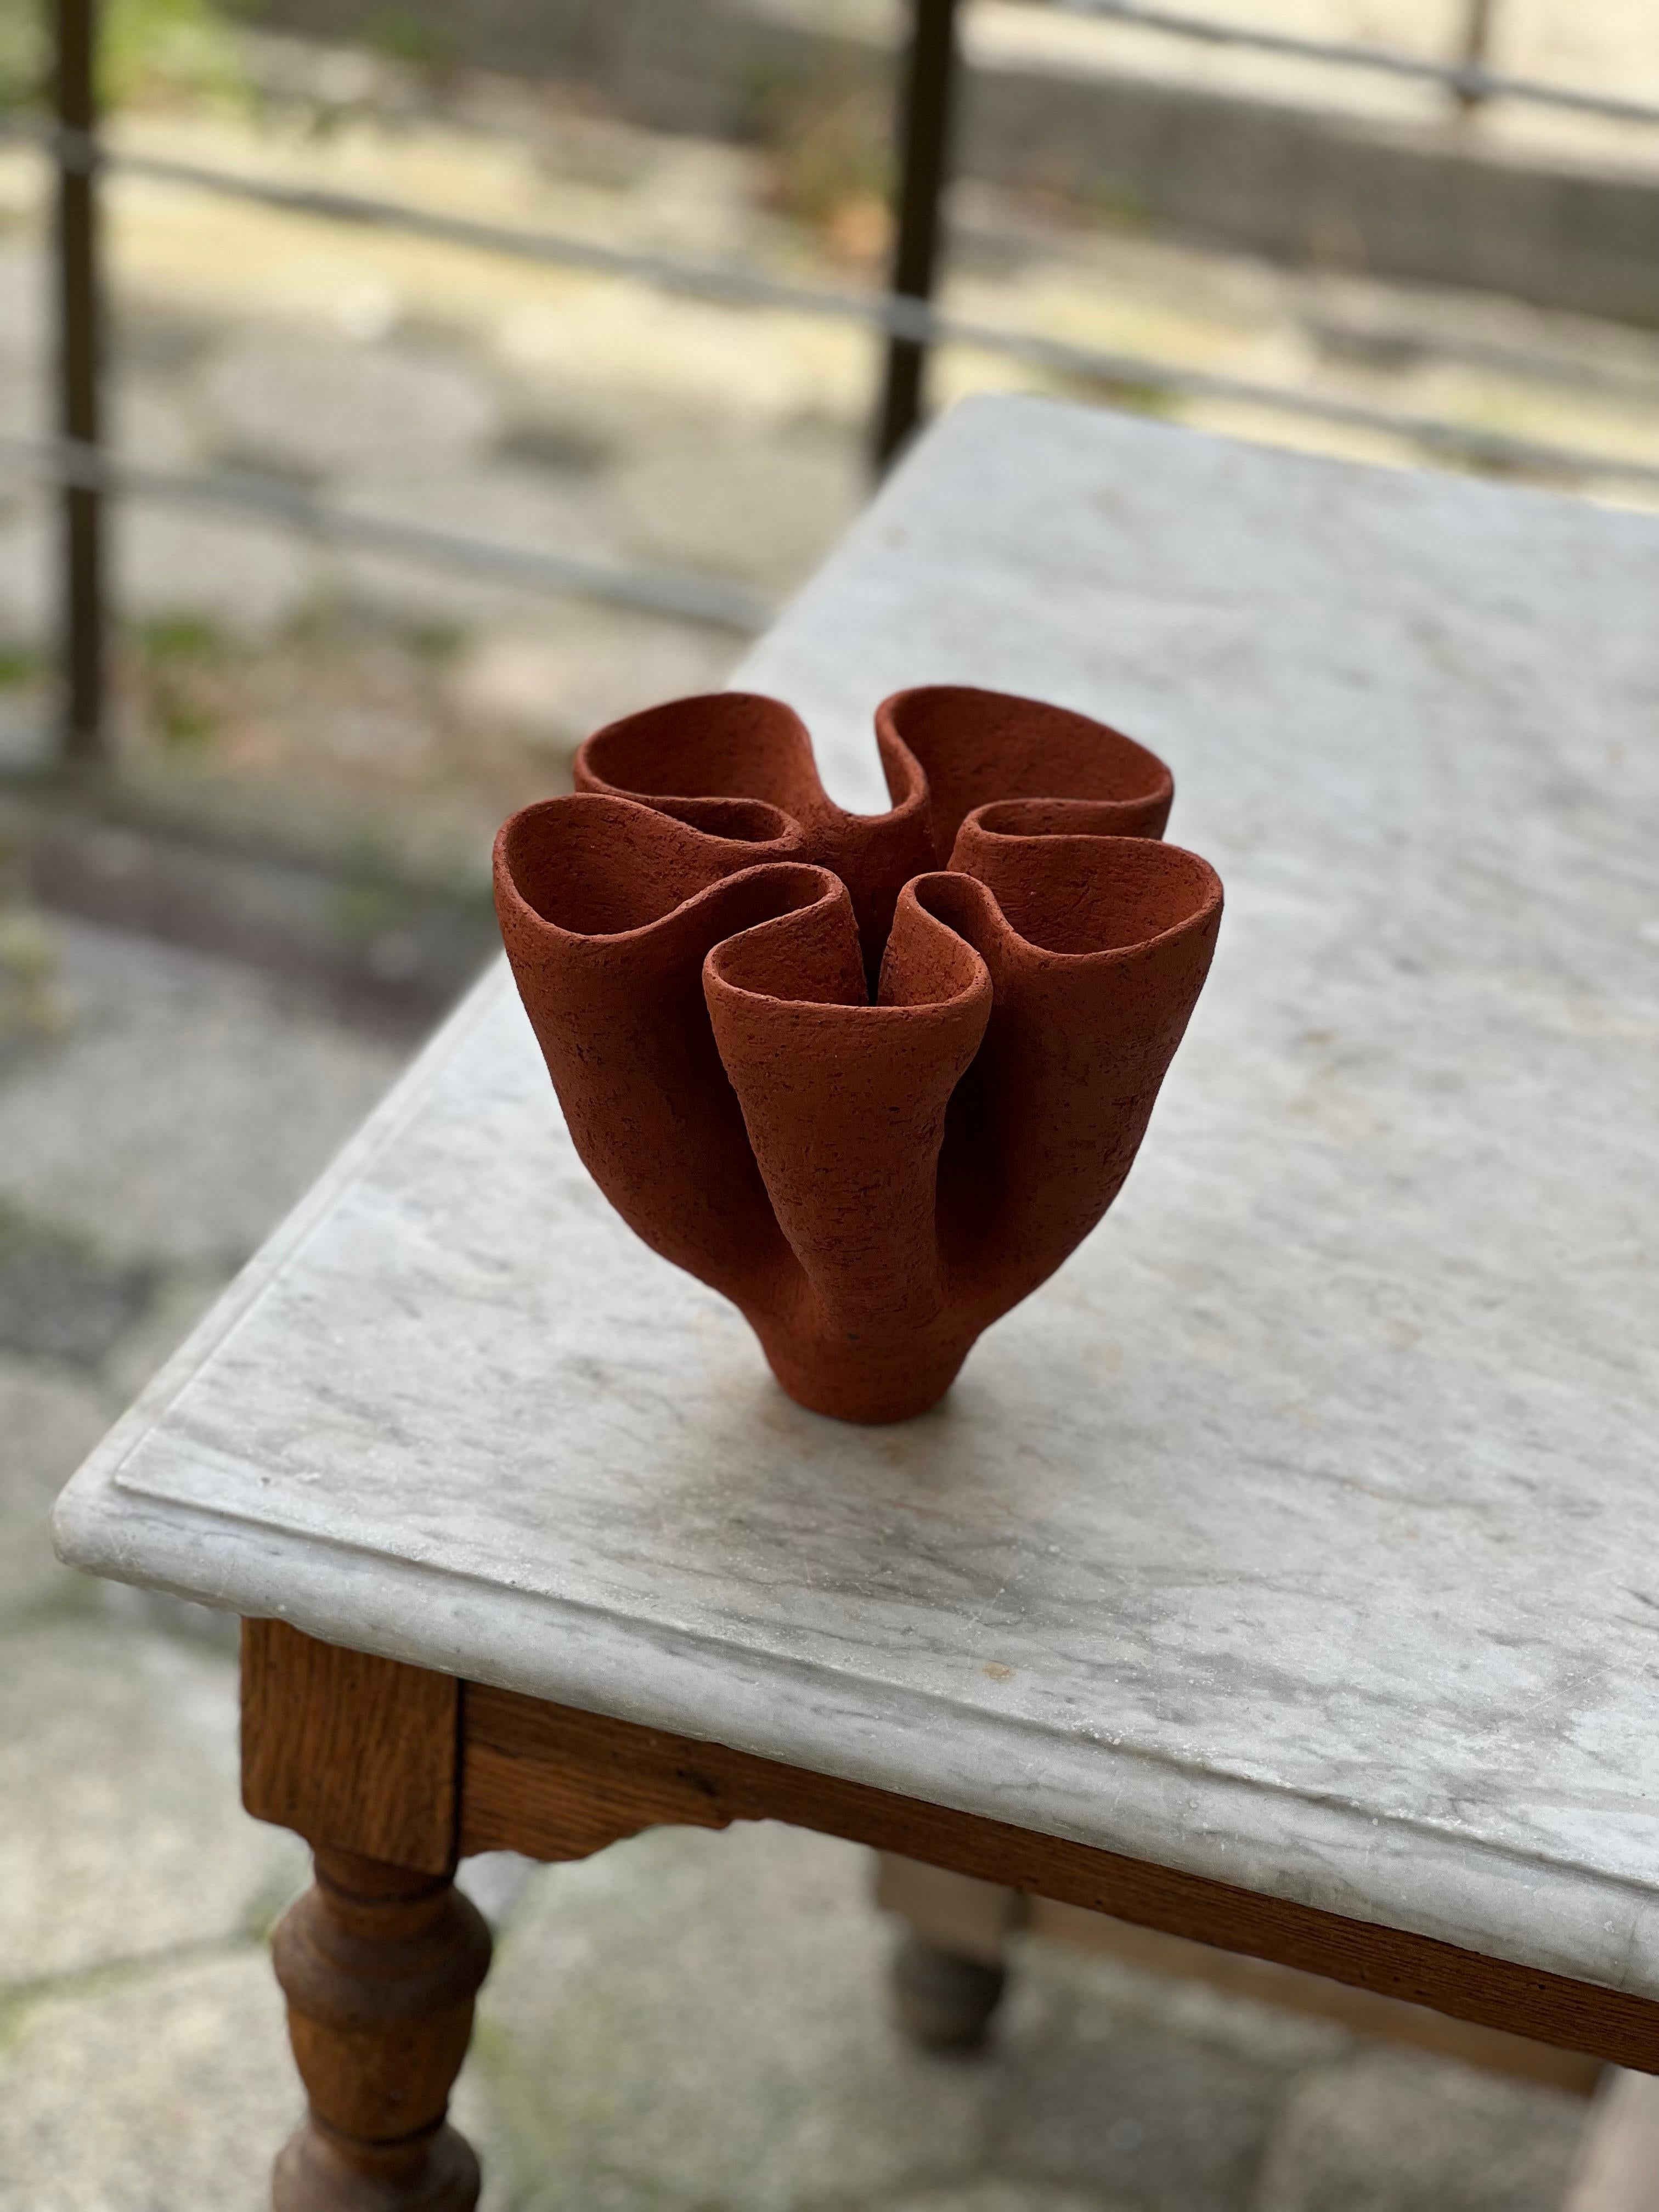 Anatolian 4 Vase by Güler Elçi
Dimensions: W 18.2 x D 18.2 x H 16.5 cm.
Materials: Stoneware Ceramic.

Güler Elçi is a ceramic artist based in Istanbul. In the light of her engineering career, she considers ceramics as a material and likes to push